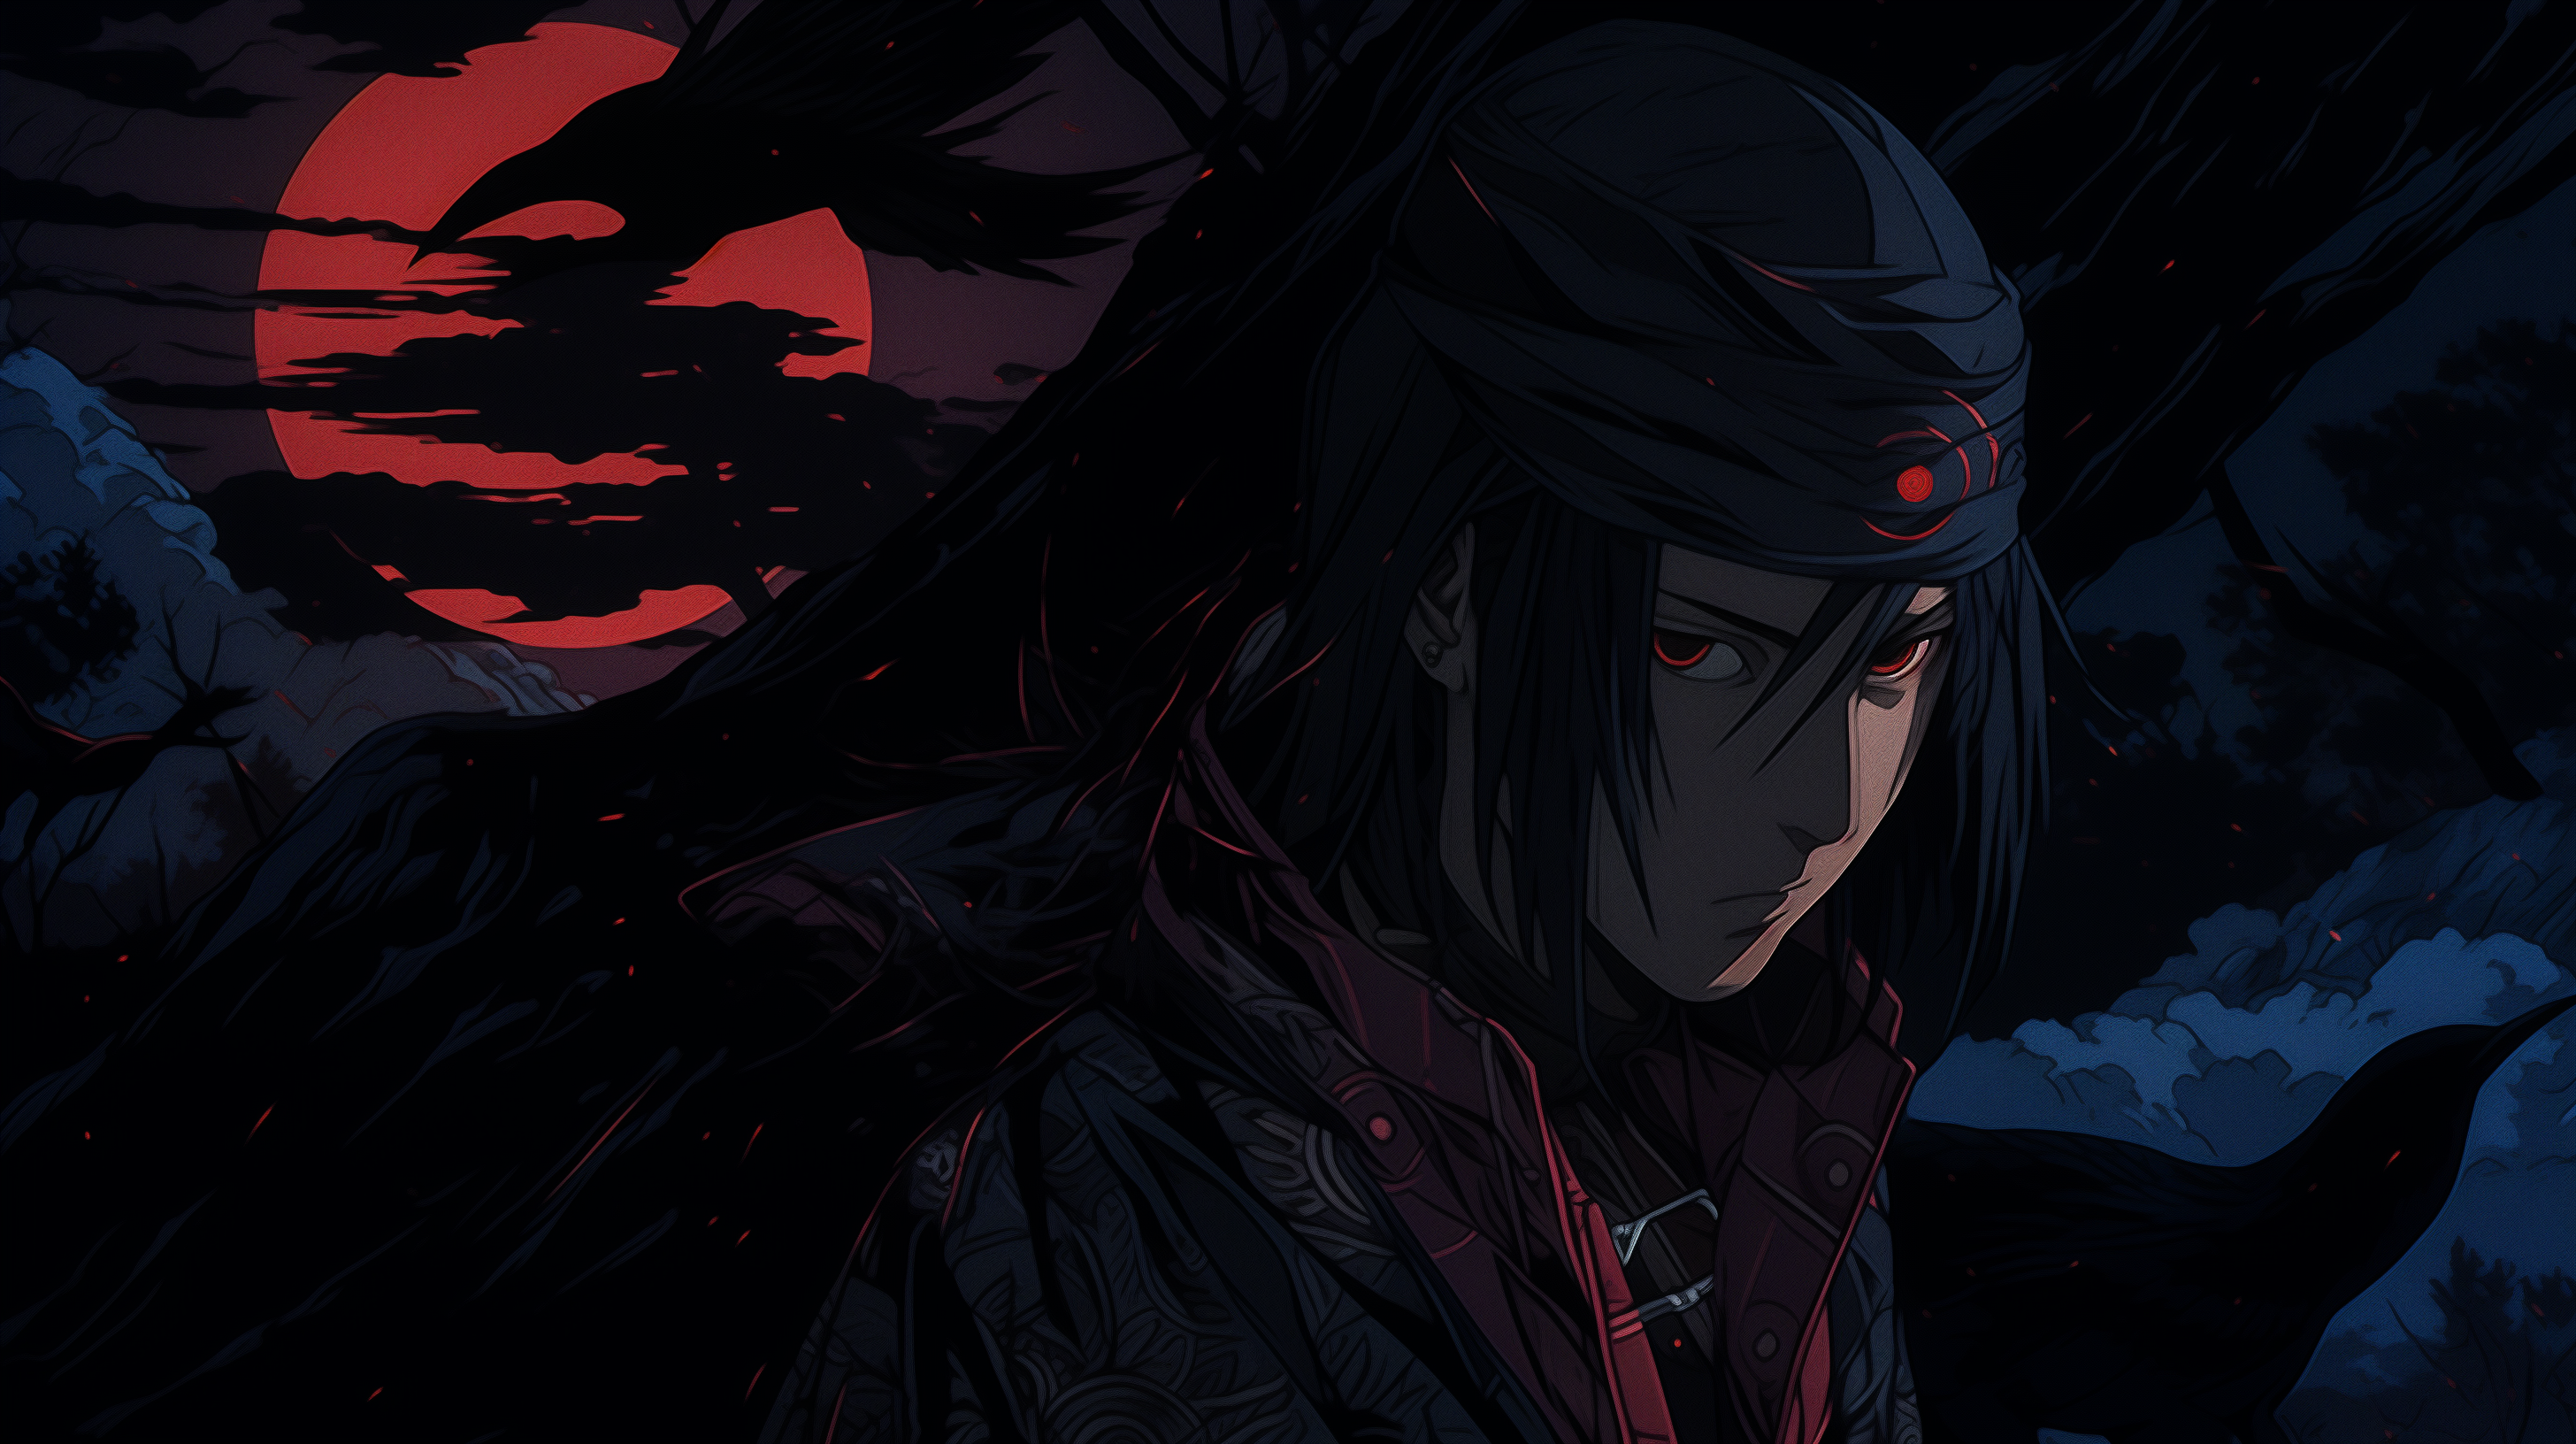 HD desktop wallpaper featuring Sasuke Uchiha from Naruto with a red moon background.